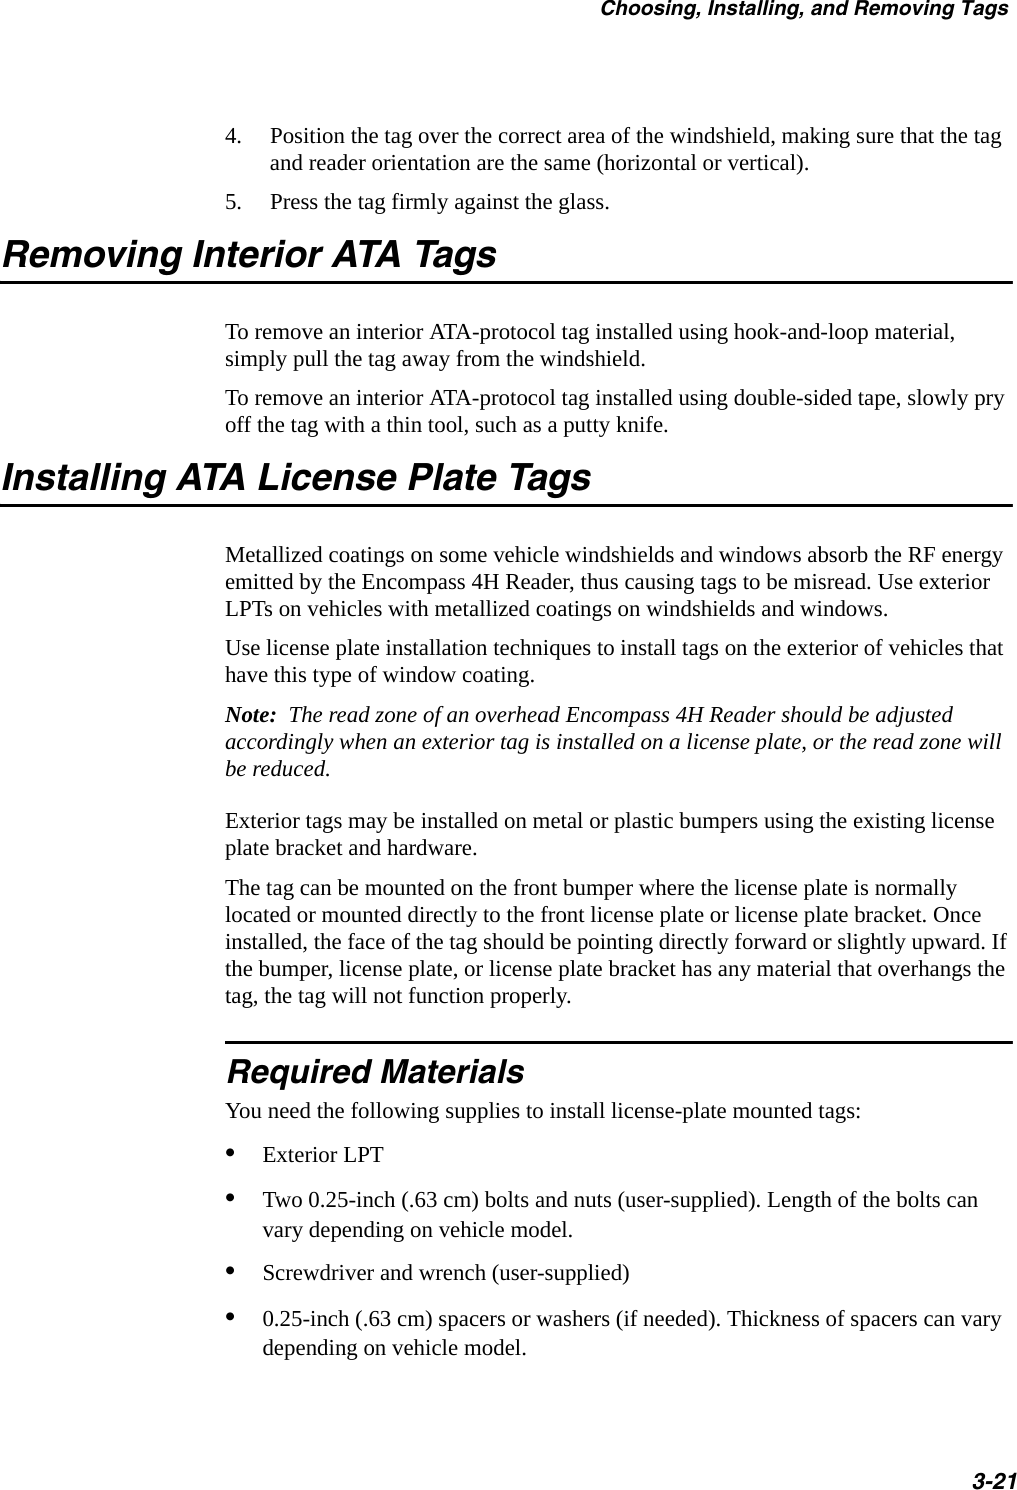 Choosing, Installing, and Removing Tags3-214. Position the tag over the correct area of the windshield, making sure that the tag and reader orientation are the same (horizontal or vertical).5. Press the tag firmly against the glass.Removing Interior ATA TagsTo remove an interior ATA-protocol tag installed using hook-and-loop material, simply pull the tag away from the windshield.To remove an interior ATA-protocol tag installed using double-sided tape, slowly pry off the tag with a thin tool, such as a putty knife.Installing ATA License Plate TagsMetallized coatings on some vehicle windshields and windows absorb the RF energy emitted by the Encompass 4H Reader, thus causing tags to be misread. Use exterior LPTs on vehicles with metallized coatings on windshields and windows.Use license plate installation techniques to install tags on the exterior of vehicles that have this type of window coating.Note:  The read zone of an overhead Encompass 4H Reader should be adjusted accordingly when an exterior tag is installed on a license plate, or the read zone will be reduced.Exterior tags may be installed on metal or plastic bumpers using the existing license plate bracket and hardware. The tag can be mounted on the front bumper where the license plate is normally located or mounted directly to the front license plate or license plate bracket. Once installed, the face of the tag should be pointing directly forward or slightly upward. If the bumper, license plate, or license plate bracket has any material that overhangs the tag, the tag will not function properly. Required MaterialsYou need the following supplies to install license-plate mounted tags:•Exterior LPT•Two 0.25-inch (.63 cm) bolts and nuts (user-supplied). Length of the bolts can vary depending on vehicle model. •Screwdriver and wrench (user-supplied) •0.25-inch (.63 cm) spacers or washers (if needed). Thickness of spacers can vary depending on vehicle model.